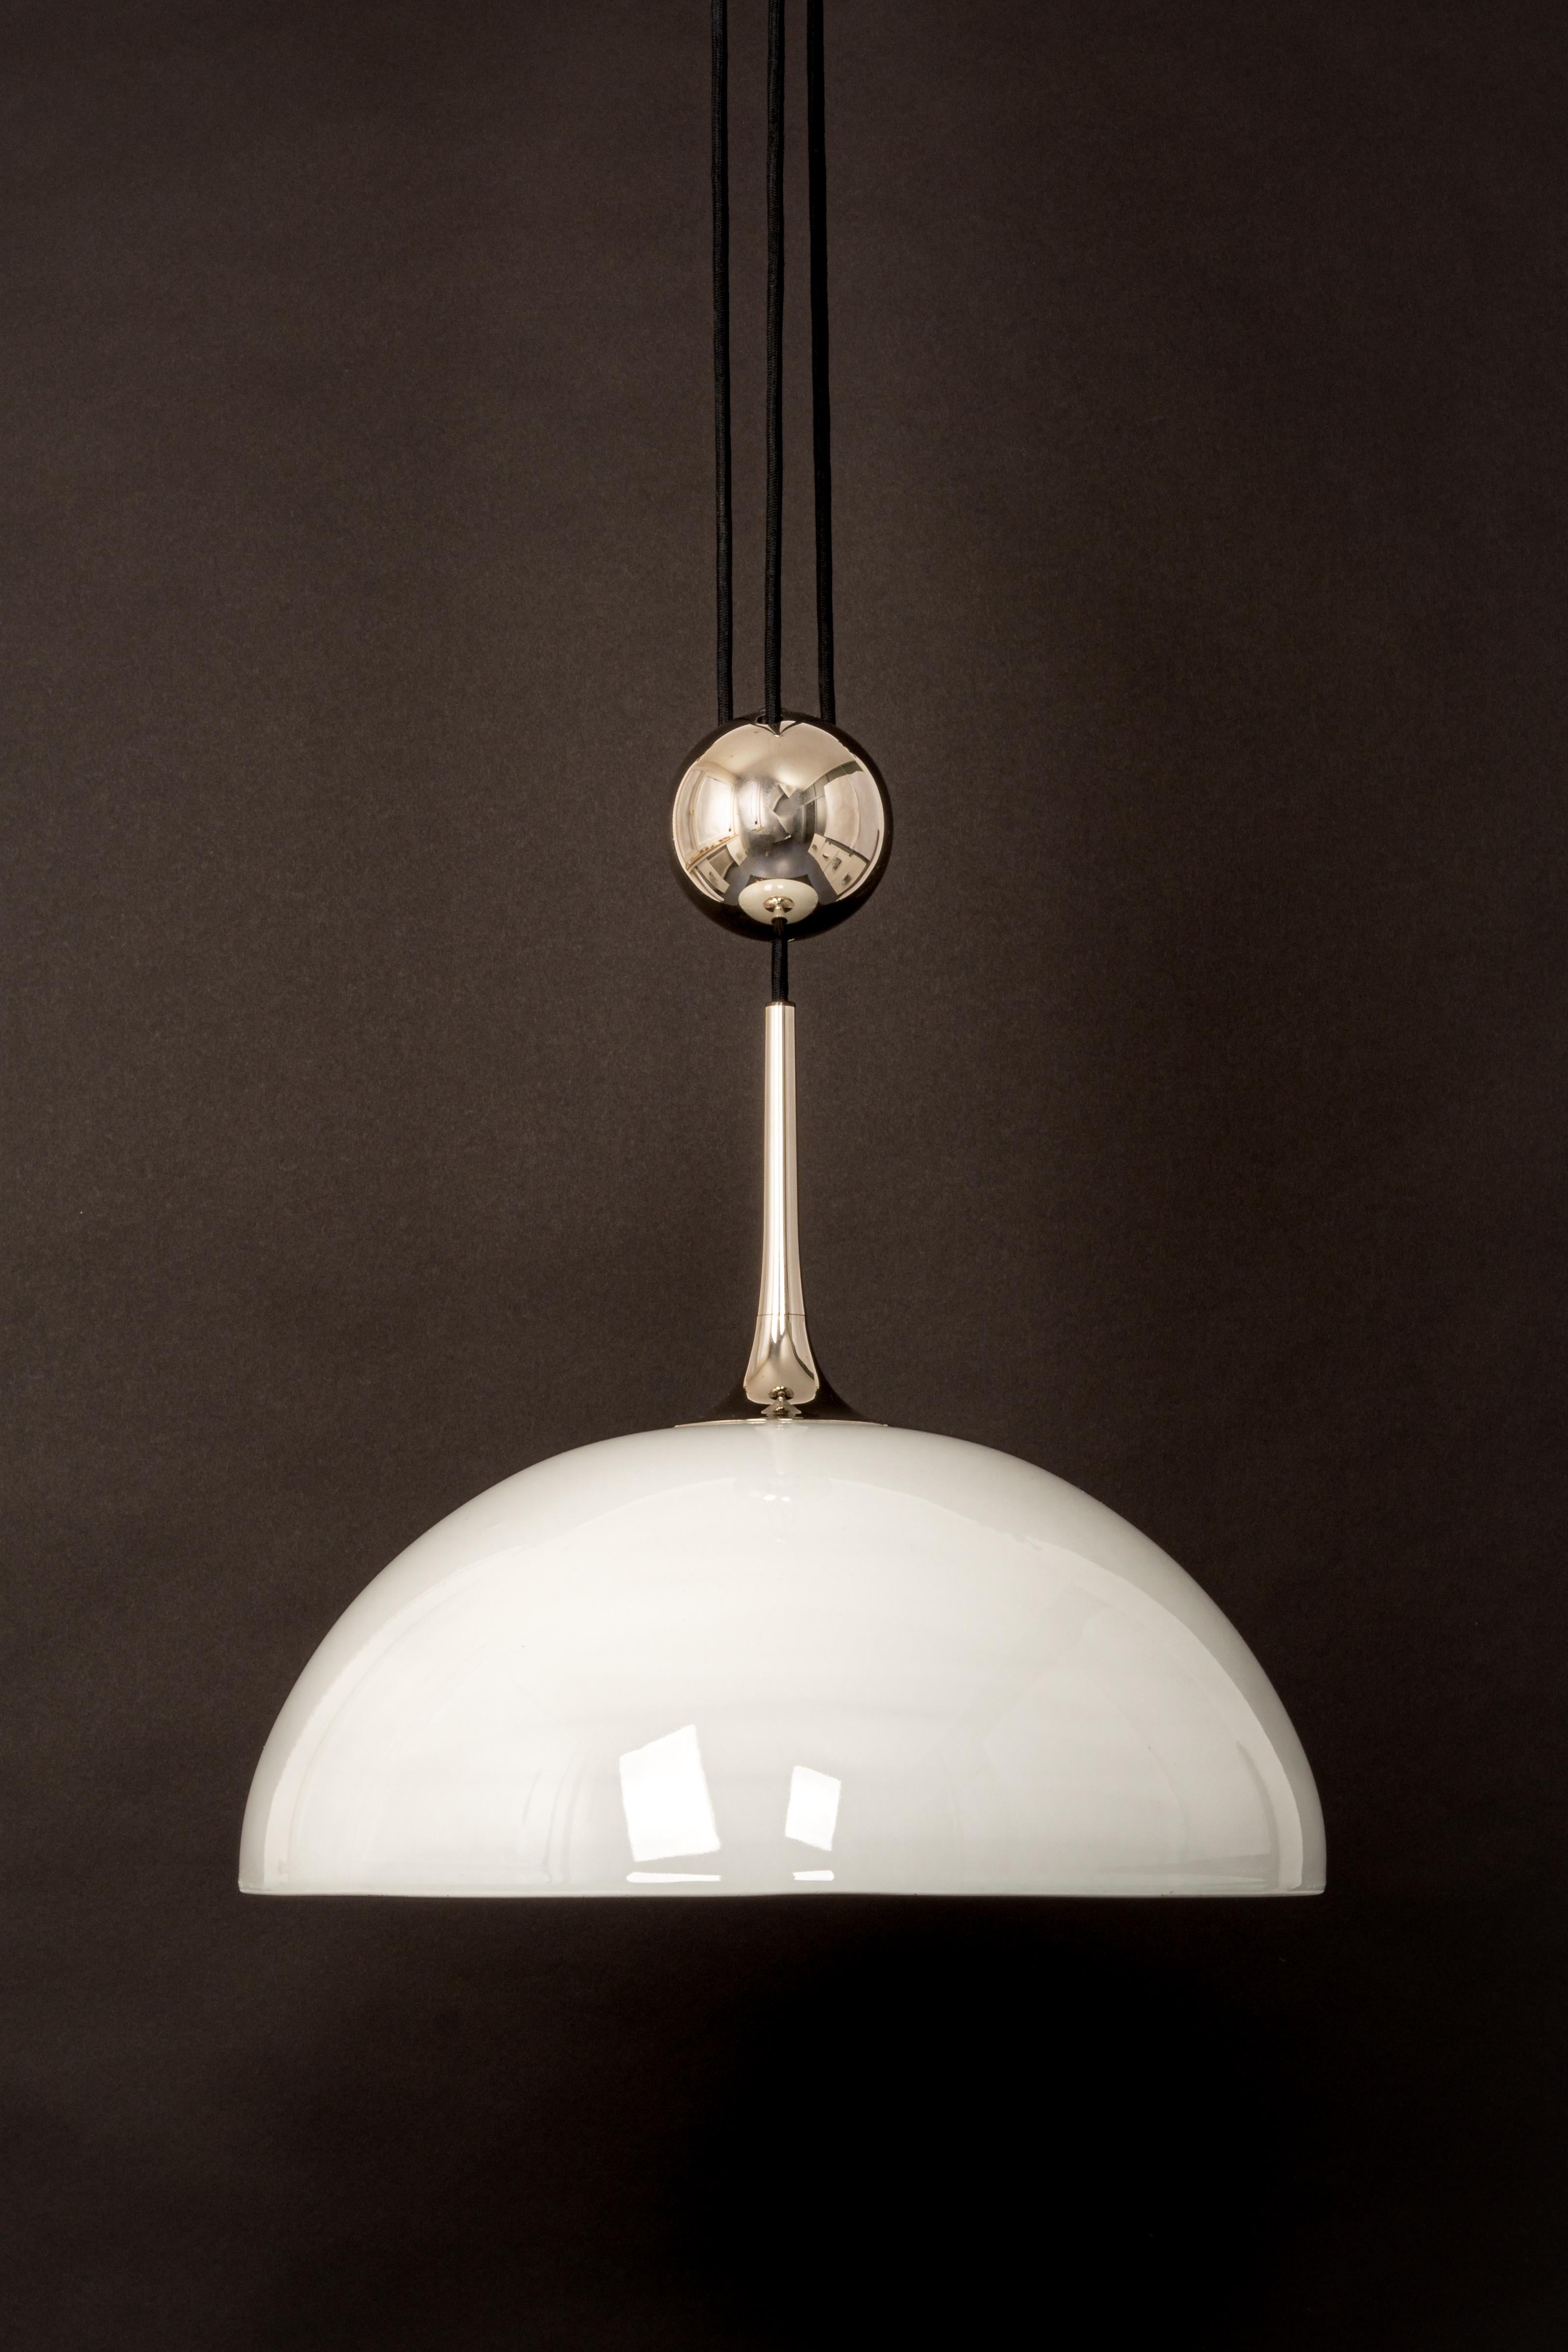 Large adjustable chrome counterweight pendant light designed by Florian Schulz, Germany, 1970s.
Socket: 1 x standard bulb - E27 - Up to 150 Watt
Light bulbs are not included. It is possible to install this fixture in all countries (US, UK, Europe,